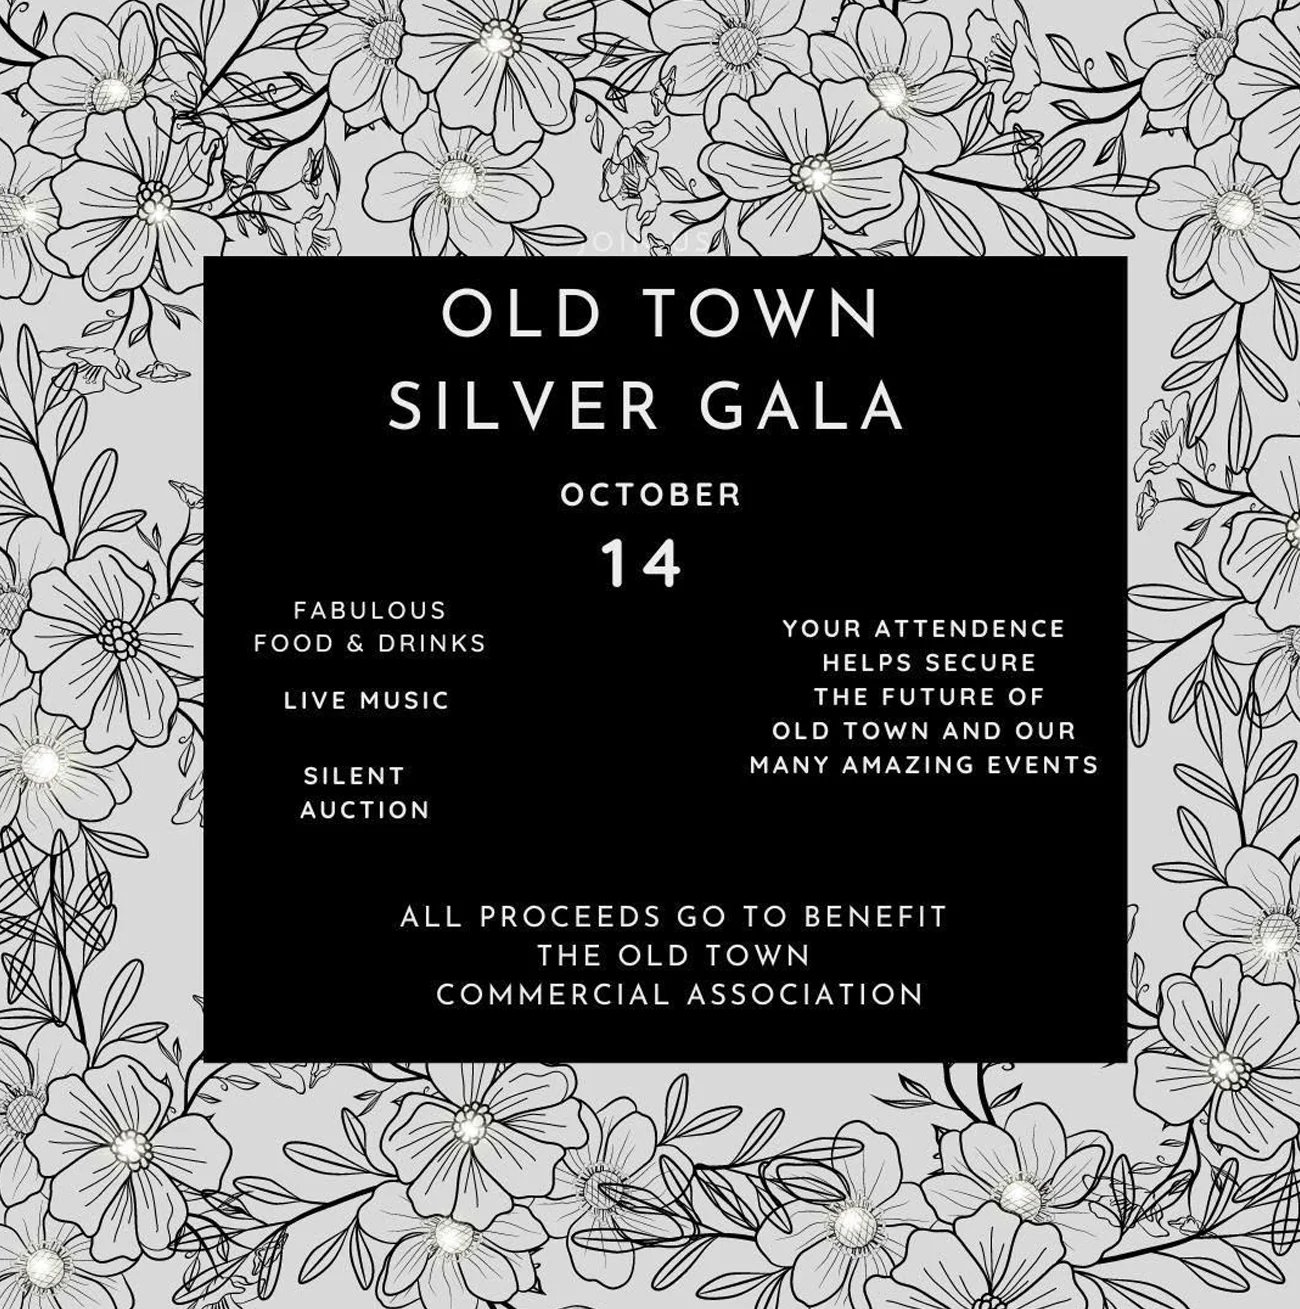 Old Town Silver Gala